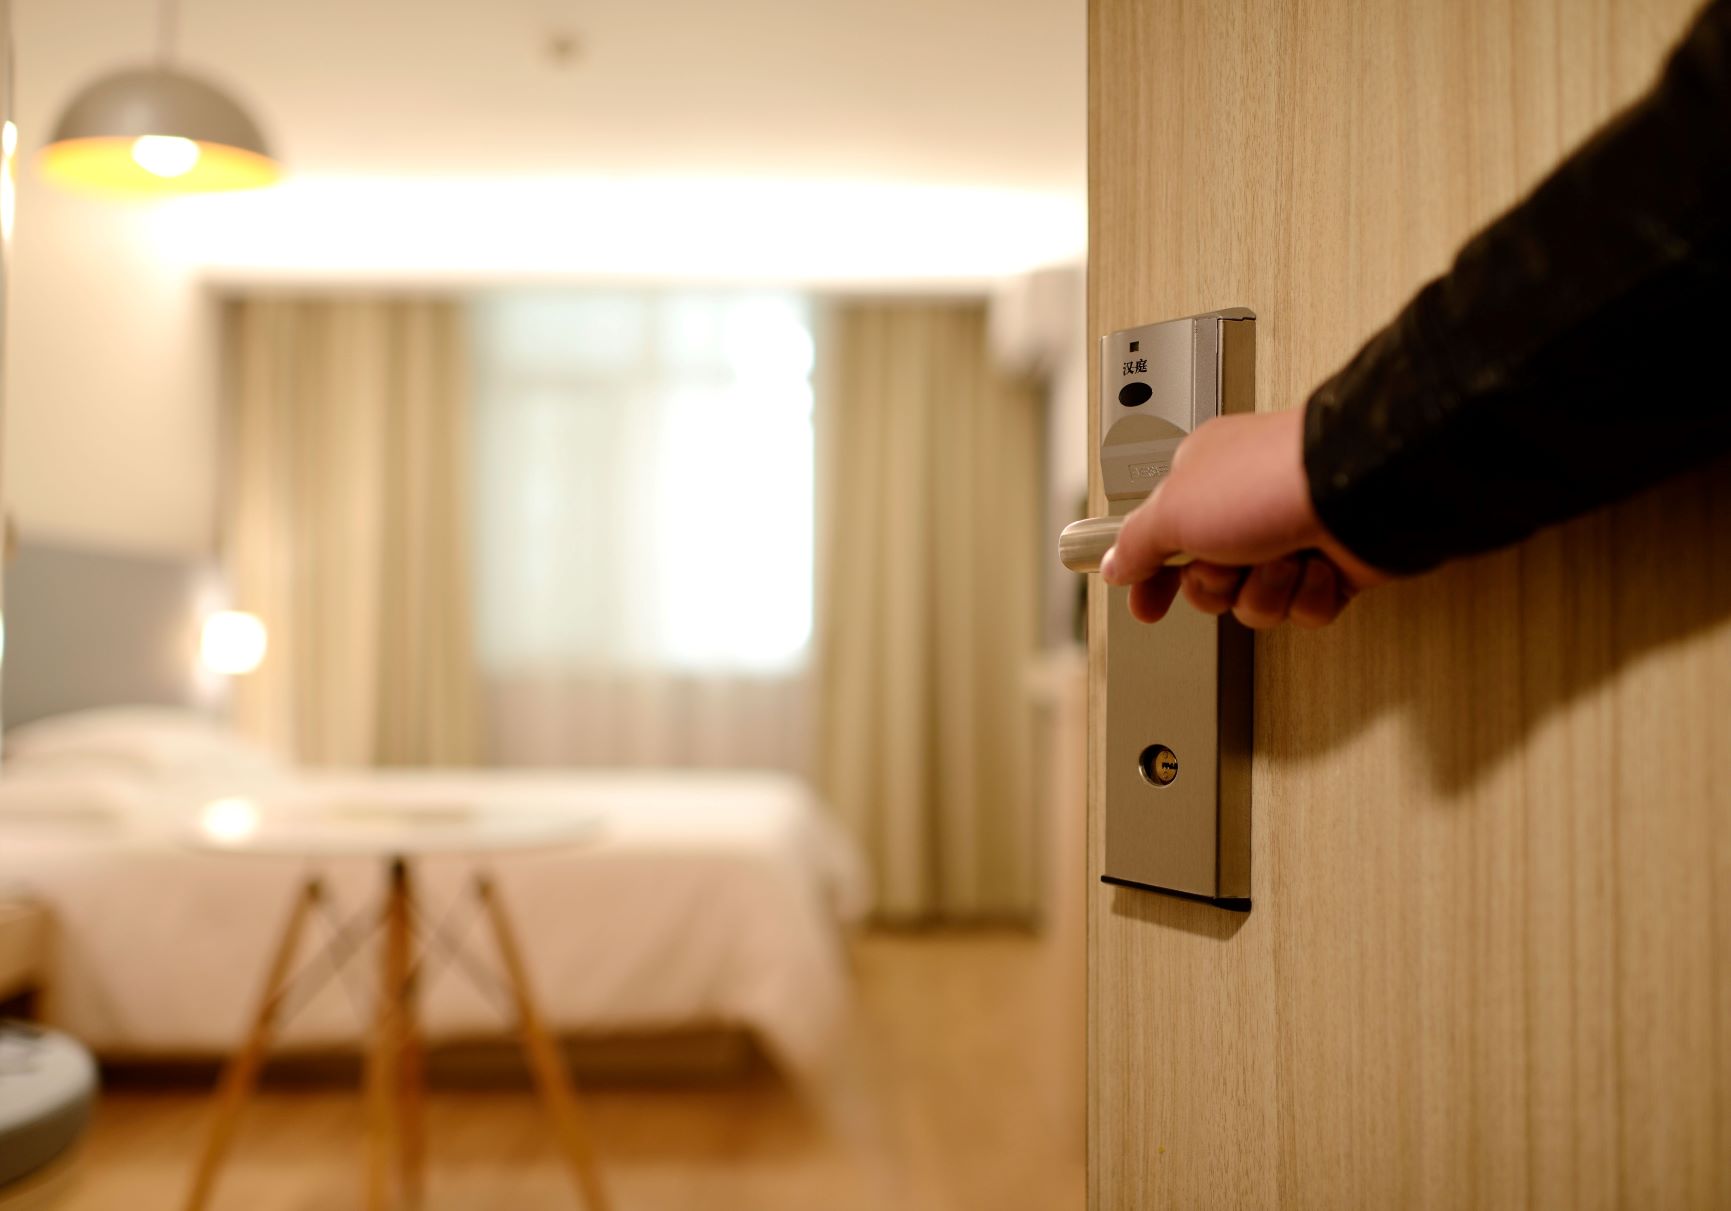 WAYS TO MAKE YOUR HOTEL MORE ECO FRIENDLY THAT YOU MIGHT NOT HAVE THOUGHT OF